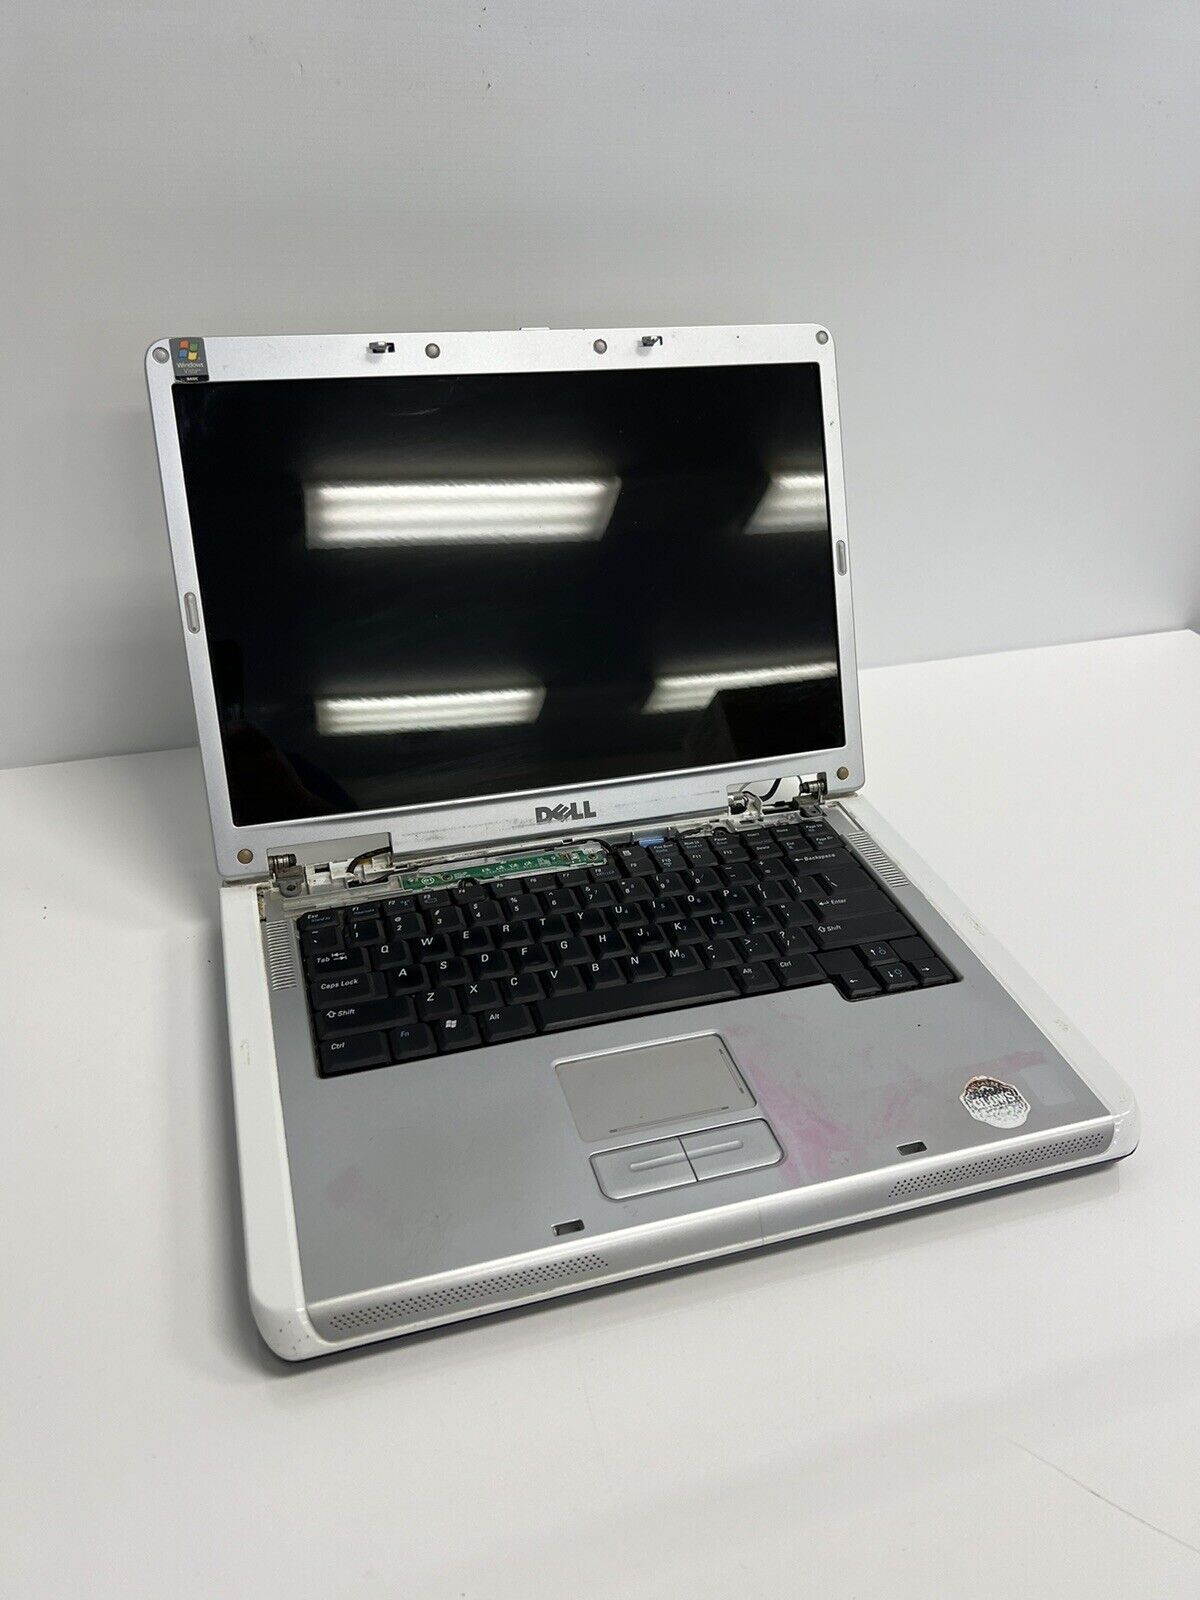 DELL INSPIRON 6000 LAPTOP - NOT TESTED FOR SPARES OR REPAIRS